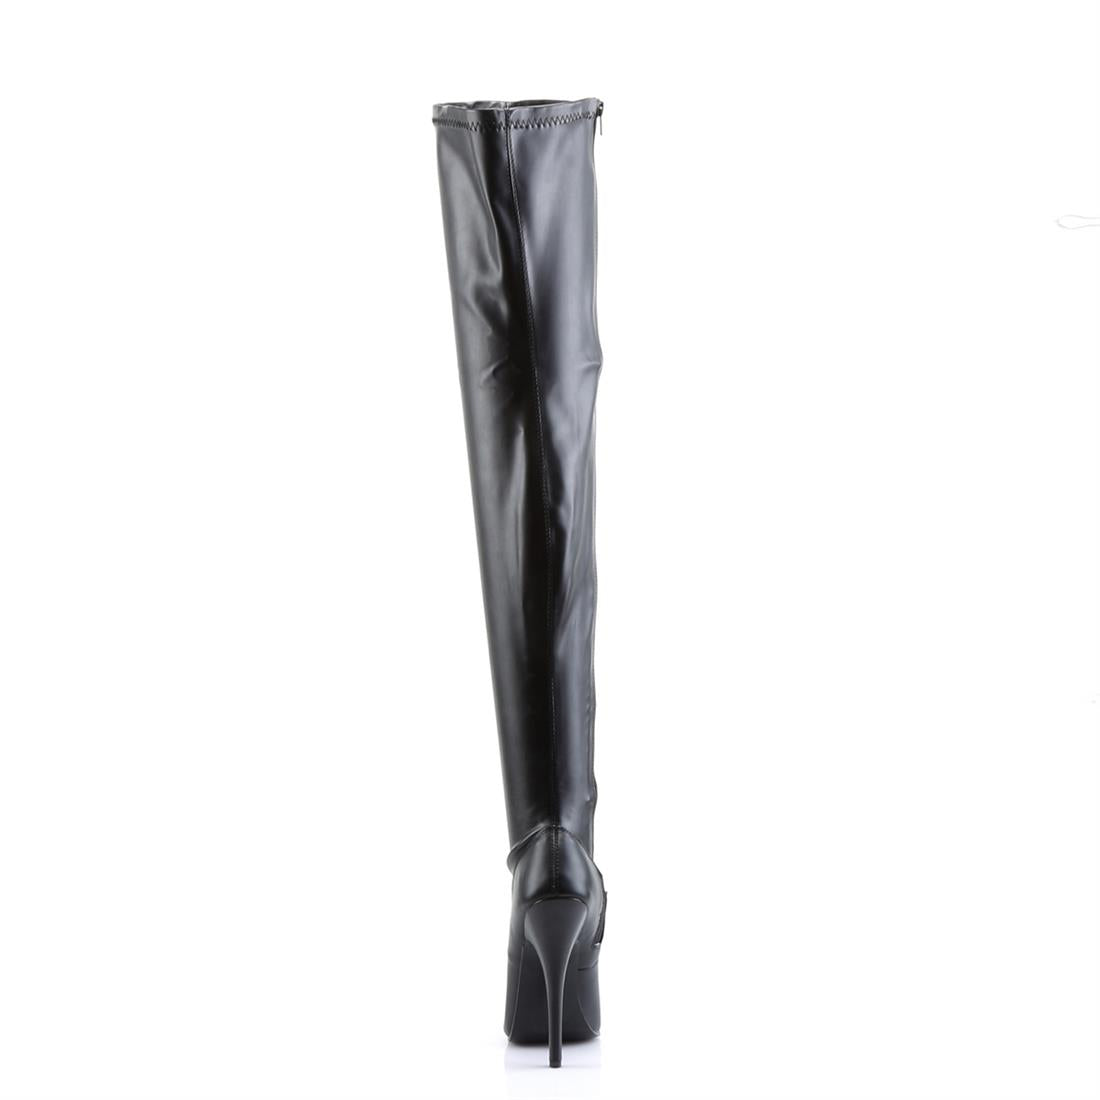 Domina-3000 – Pleaser Shoes